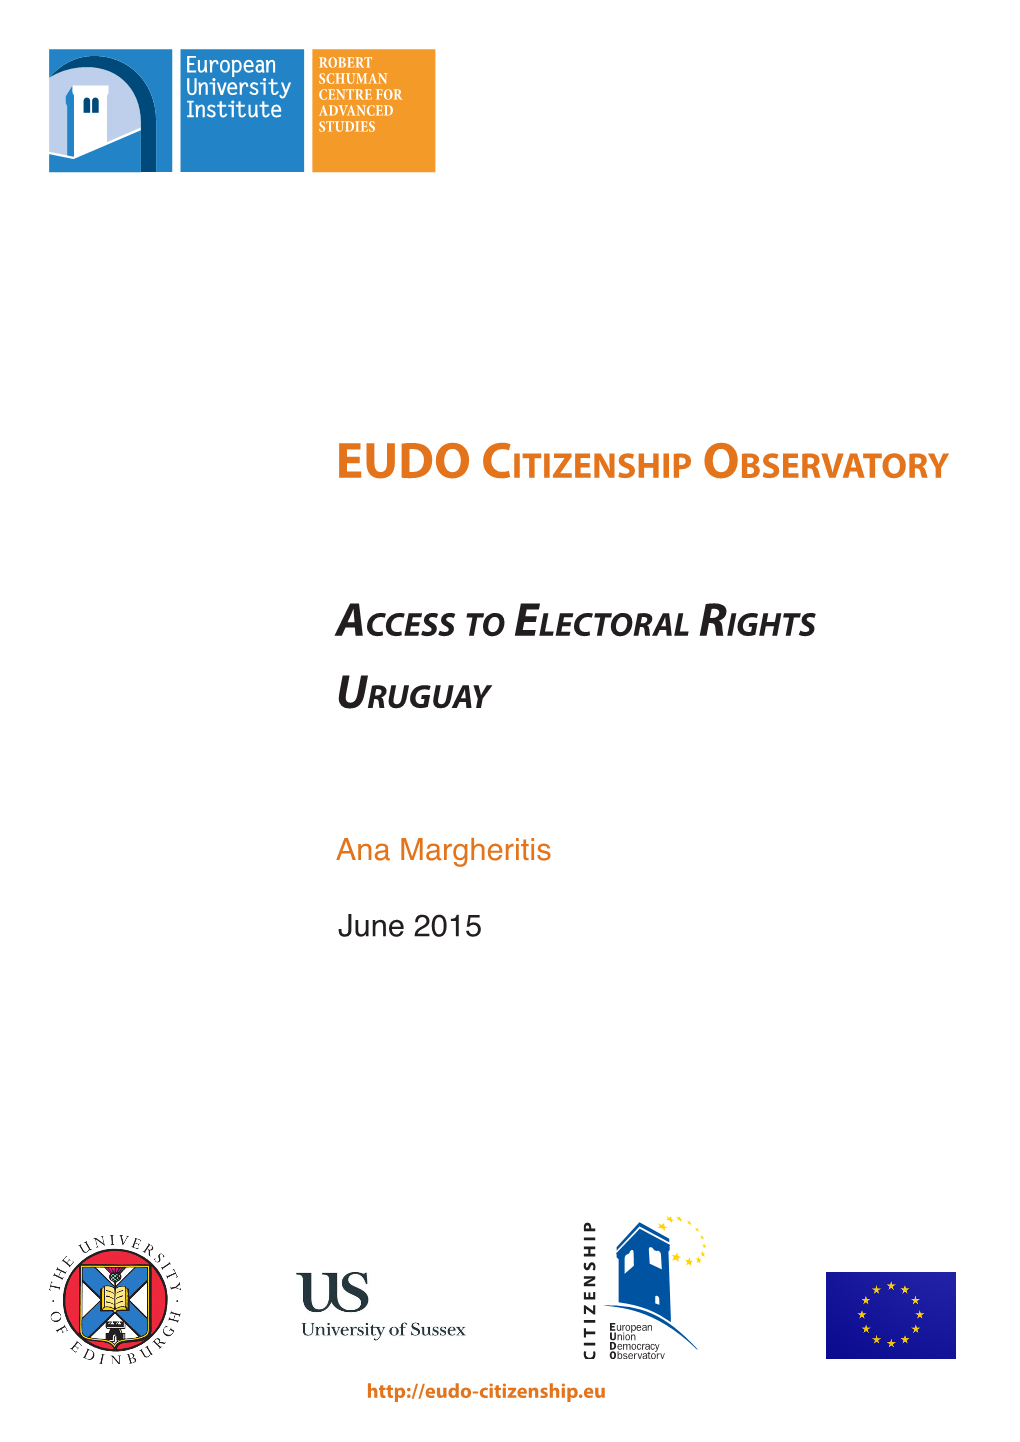 EUDO CITIZENSHIP OBSERVATORY Access to Electoral Rights Uruguay